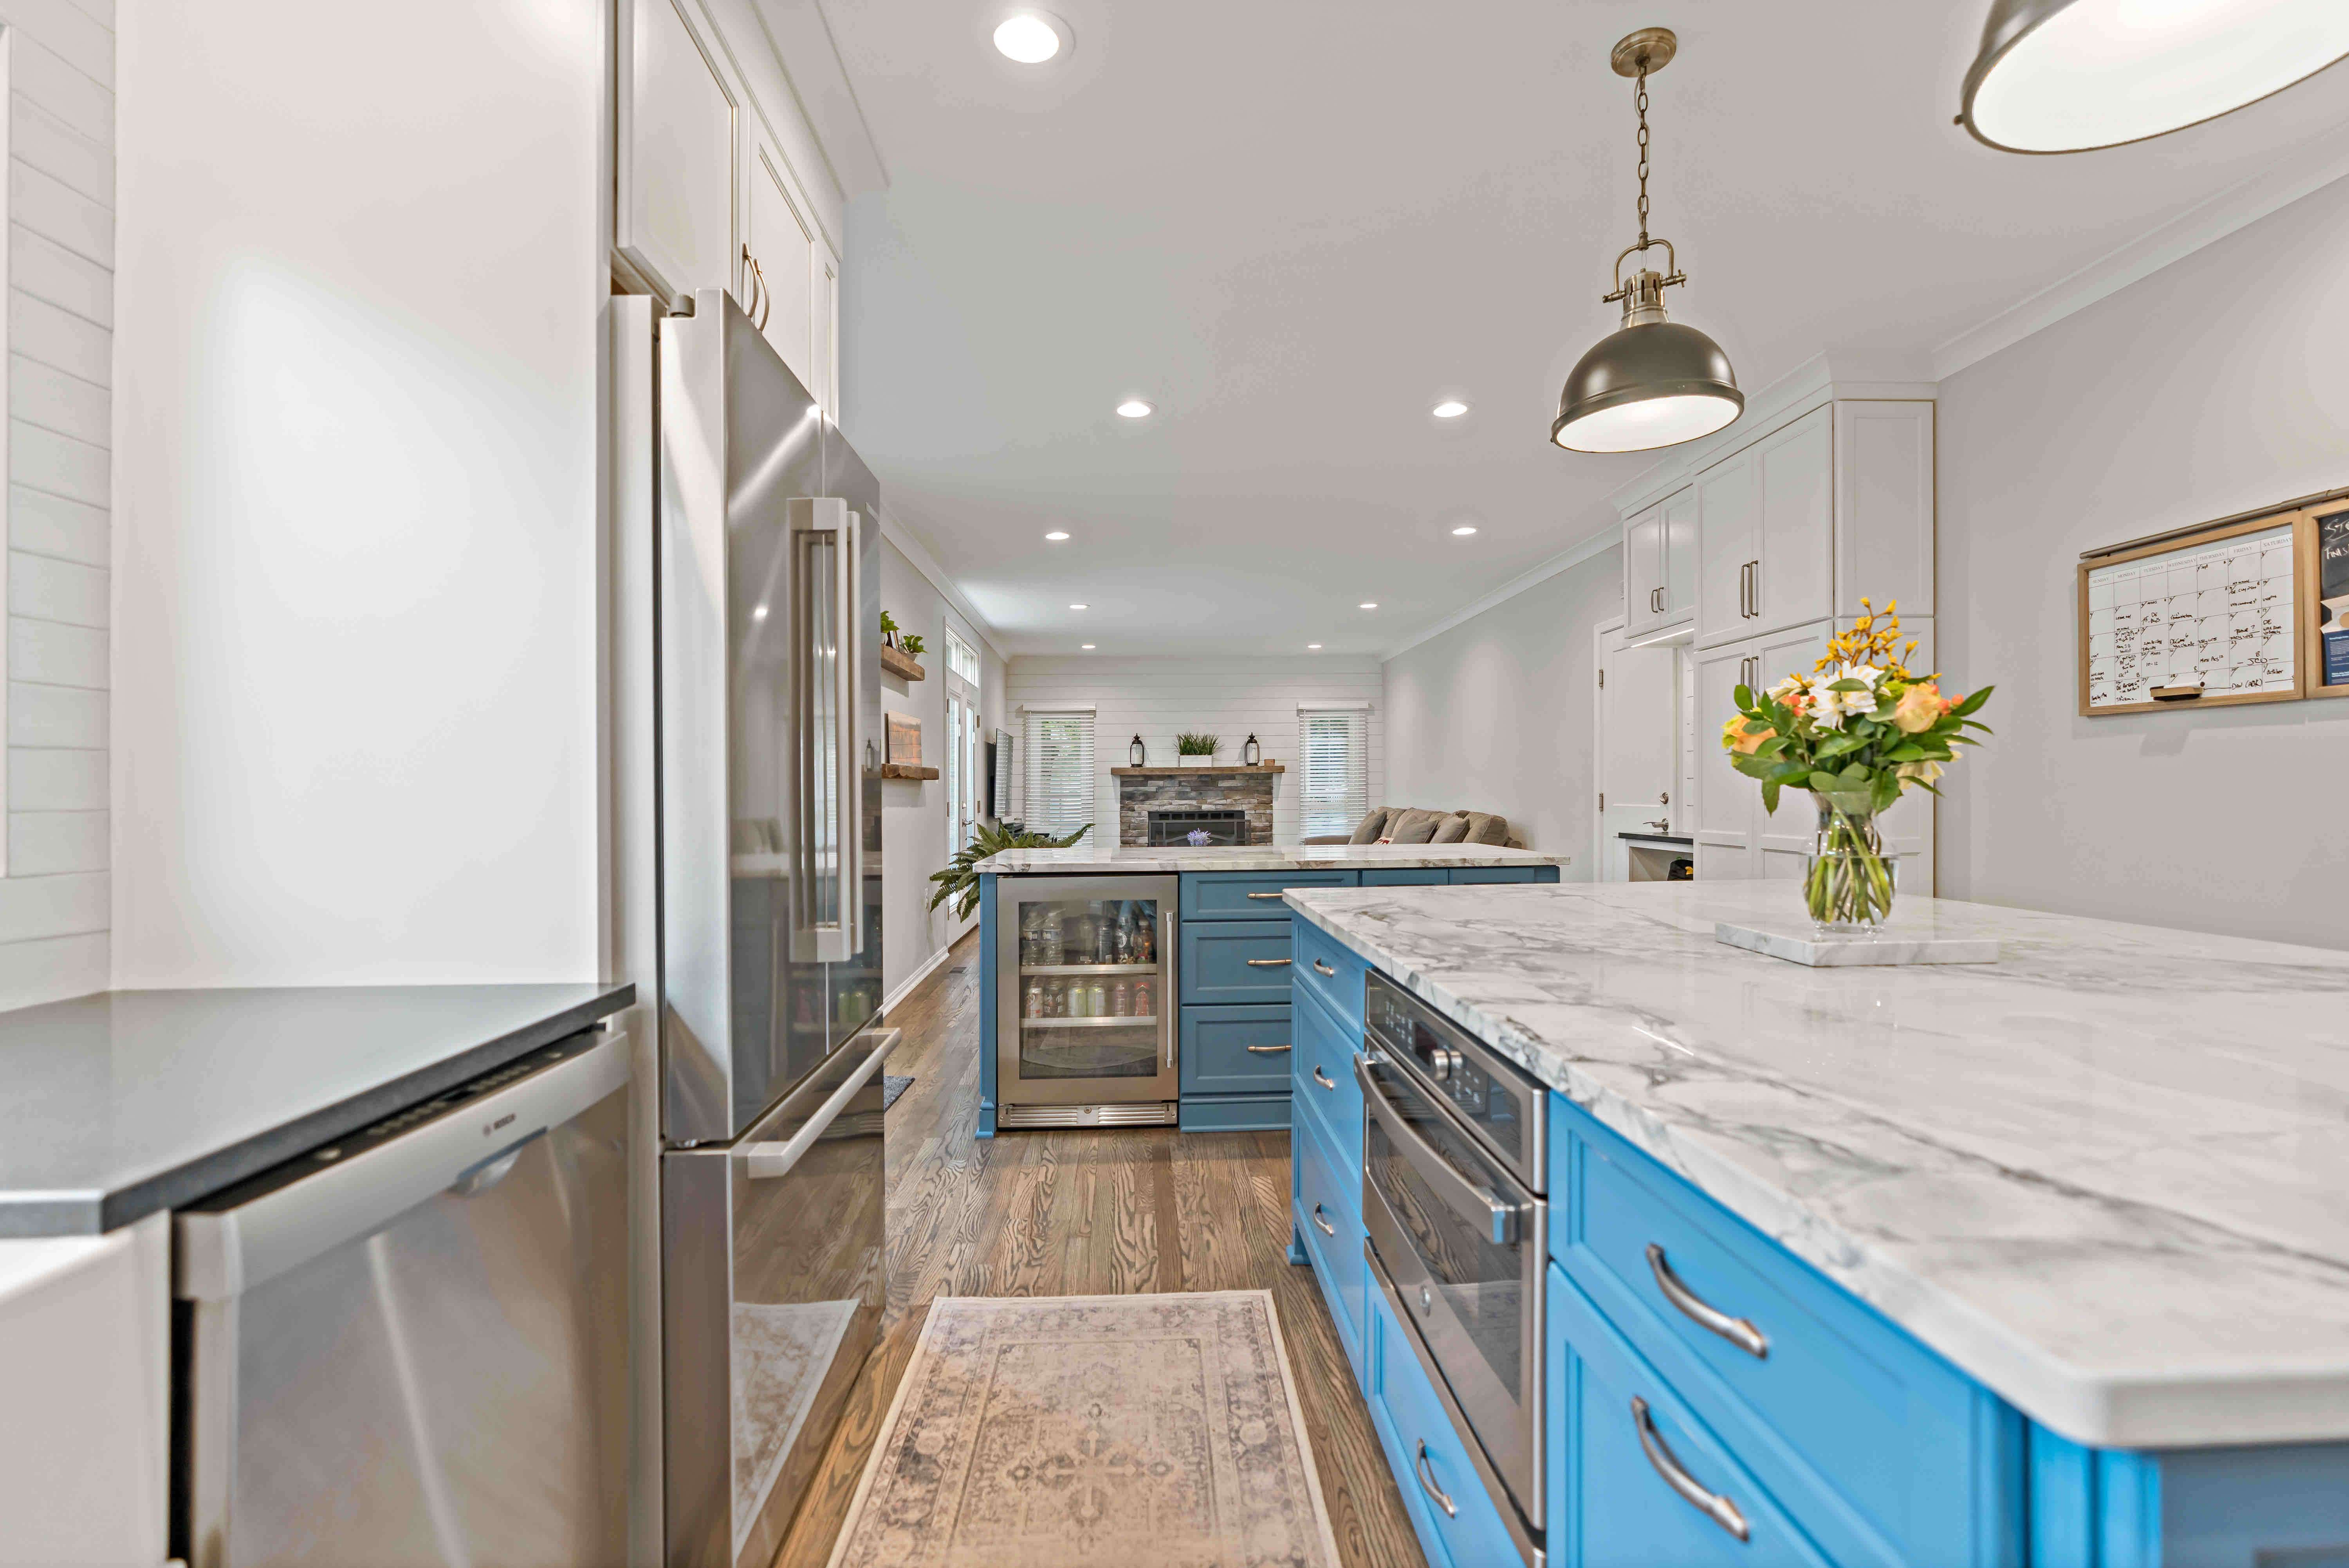 Silver appliances in white and blue kitchen